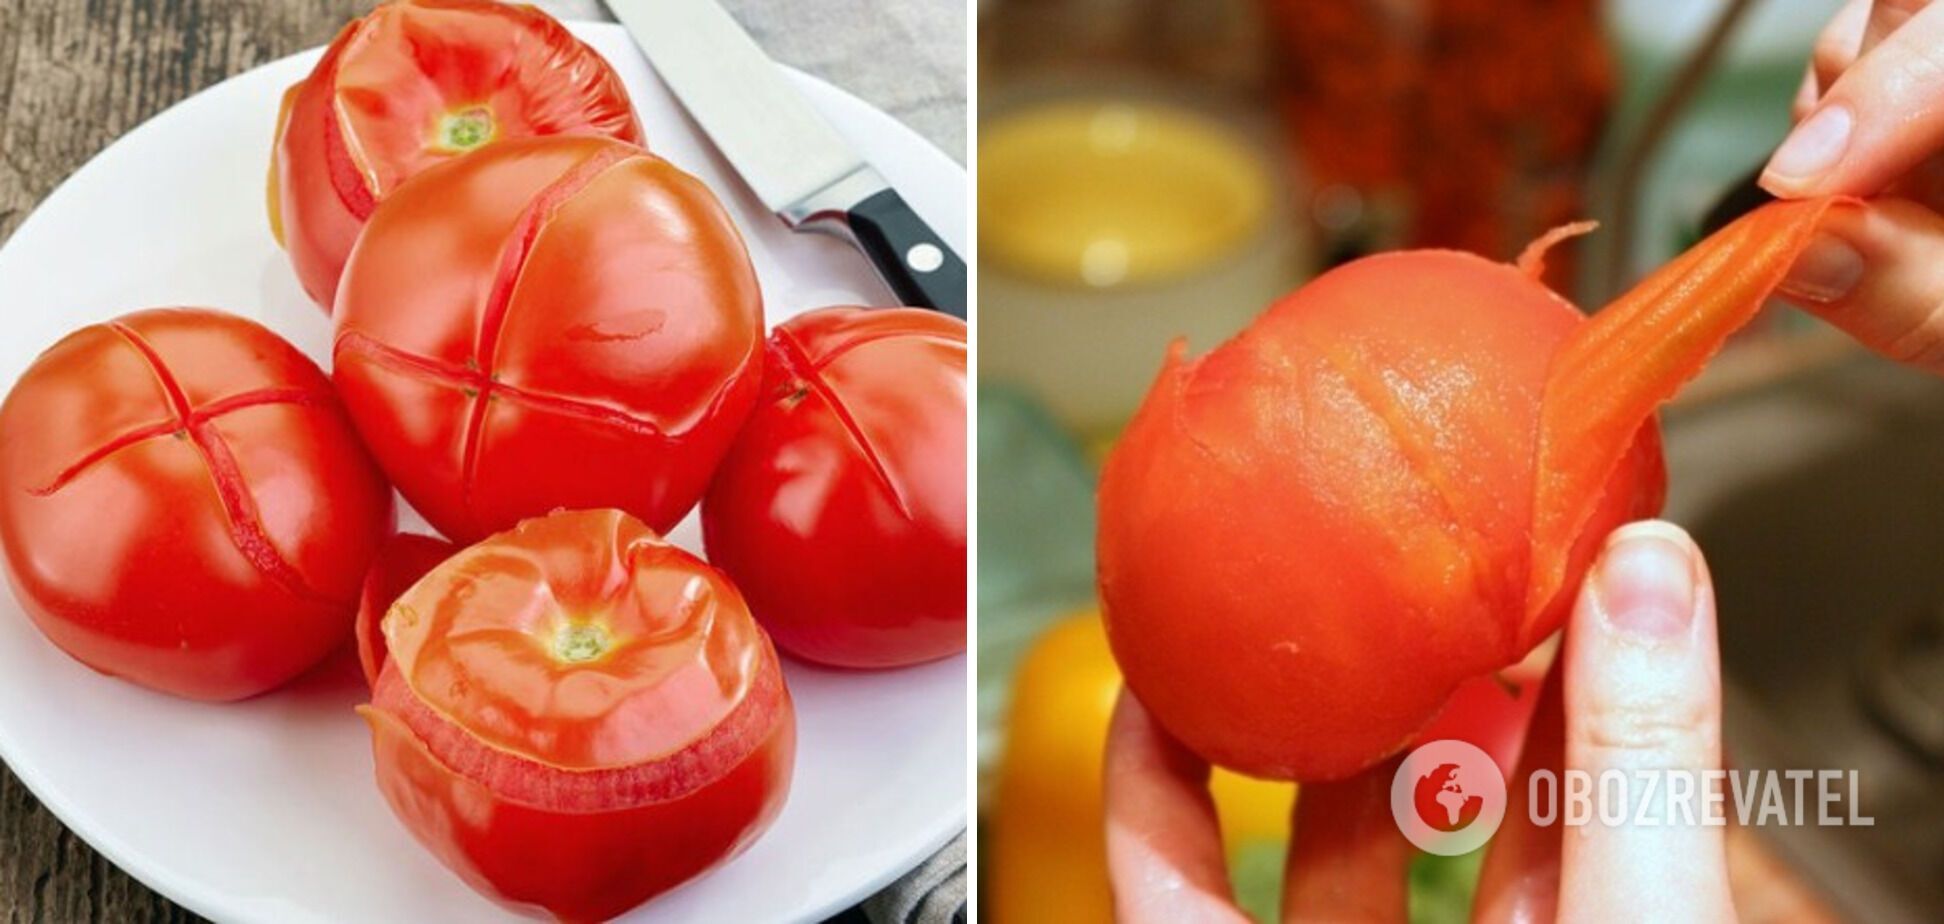 How to peel tomatoes without a knife